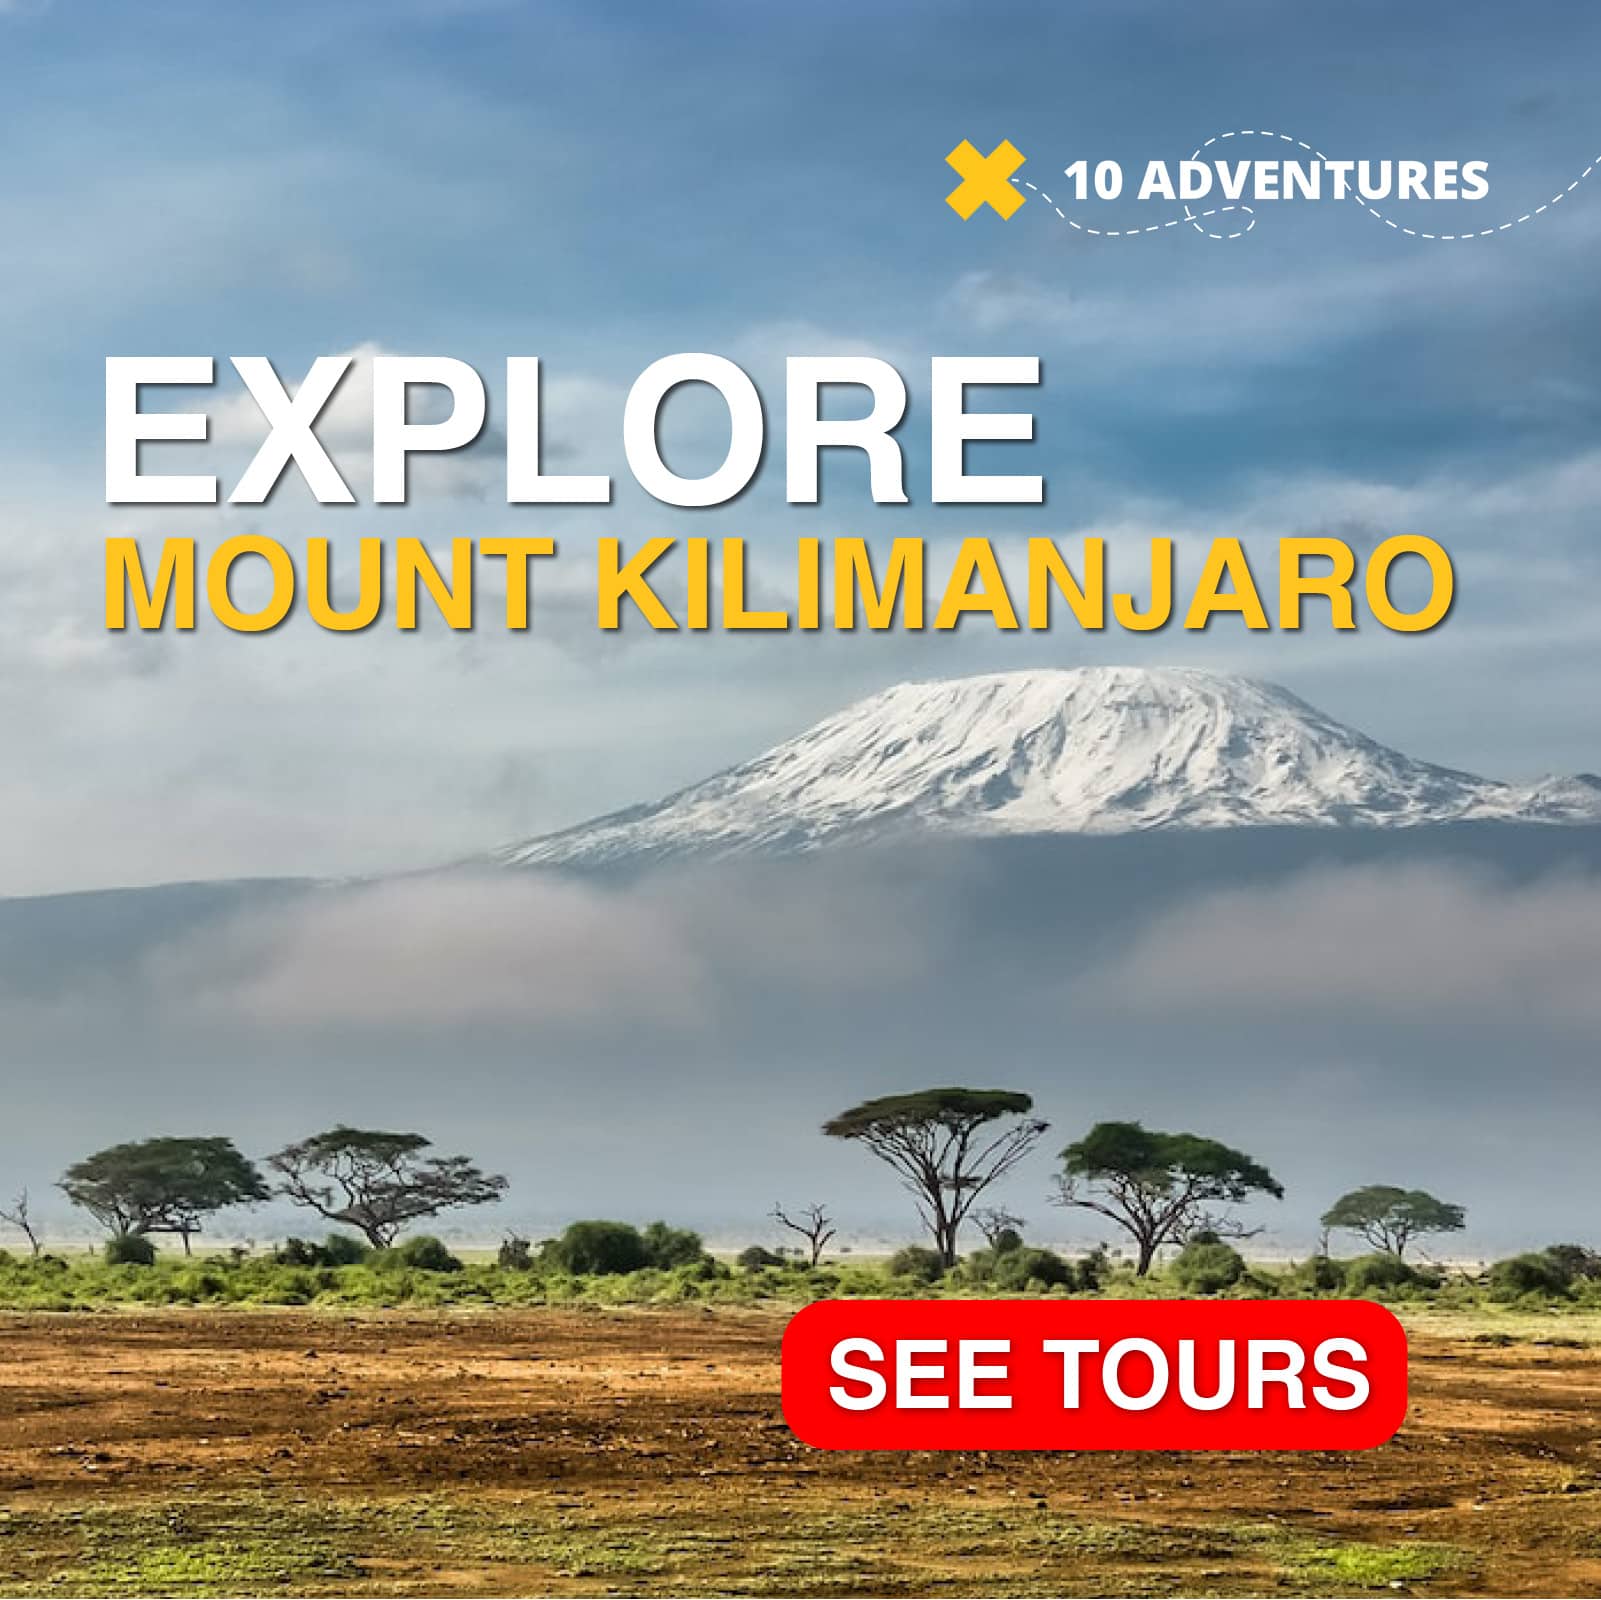 Check out these great tours in Mount Kilimanjaro Region in Africa